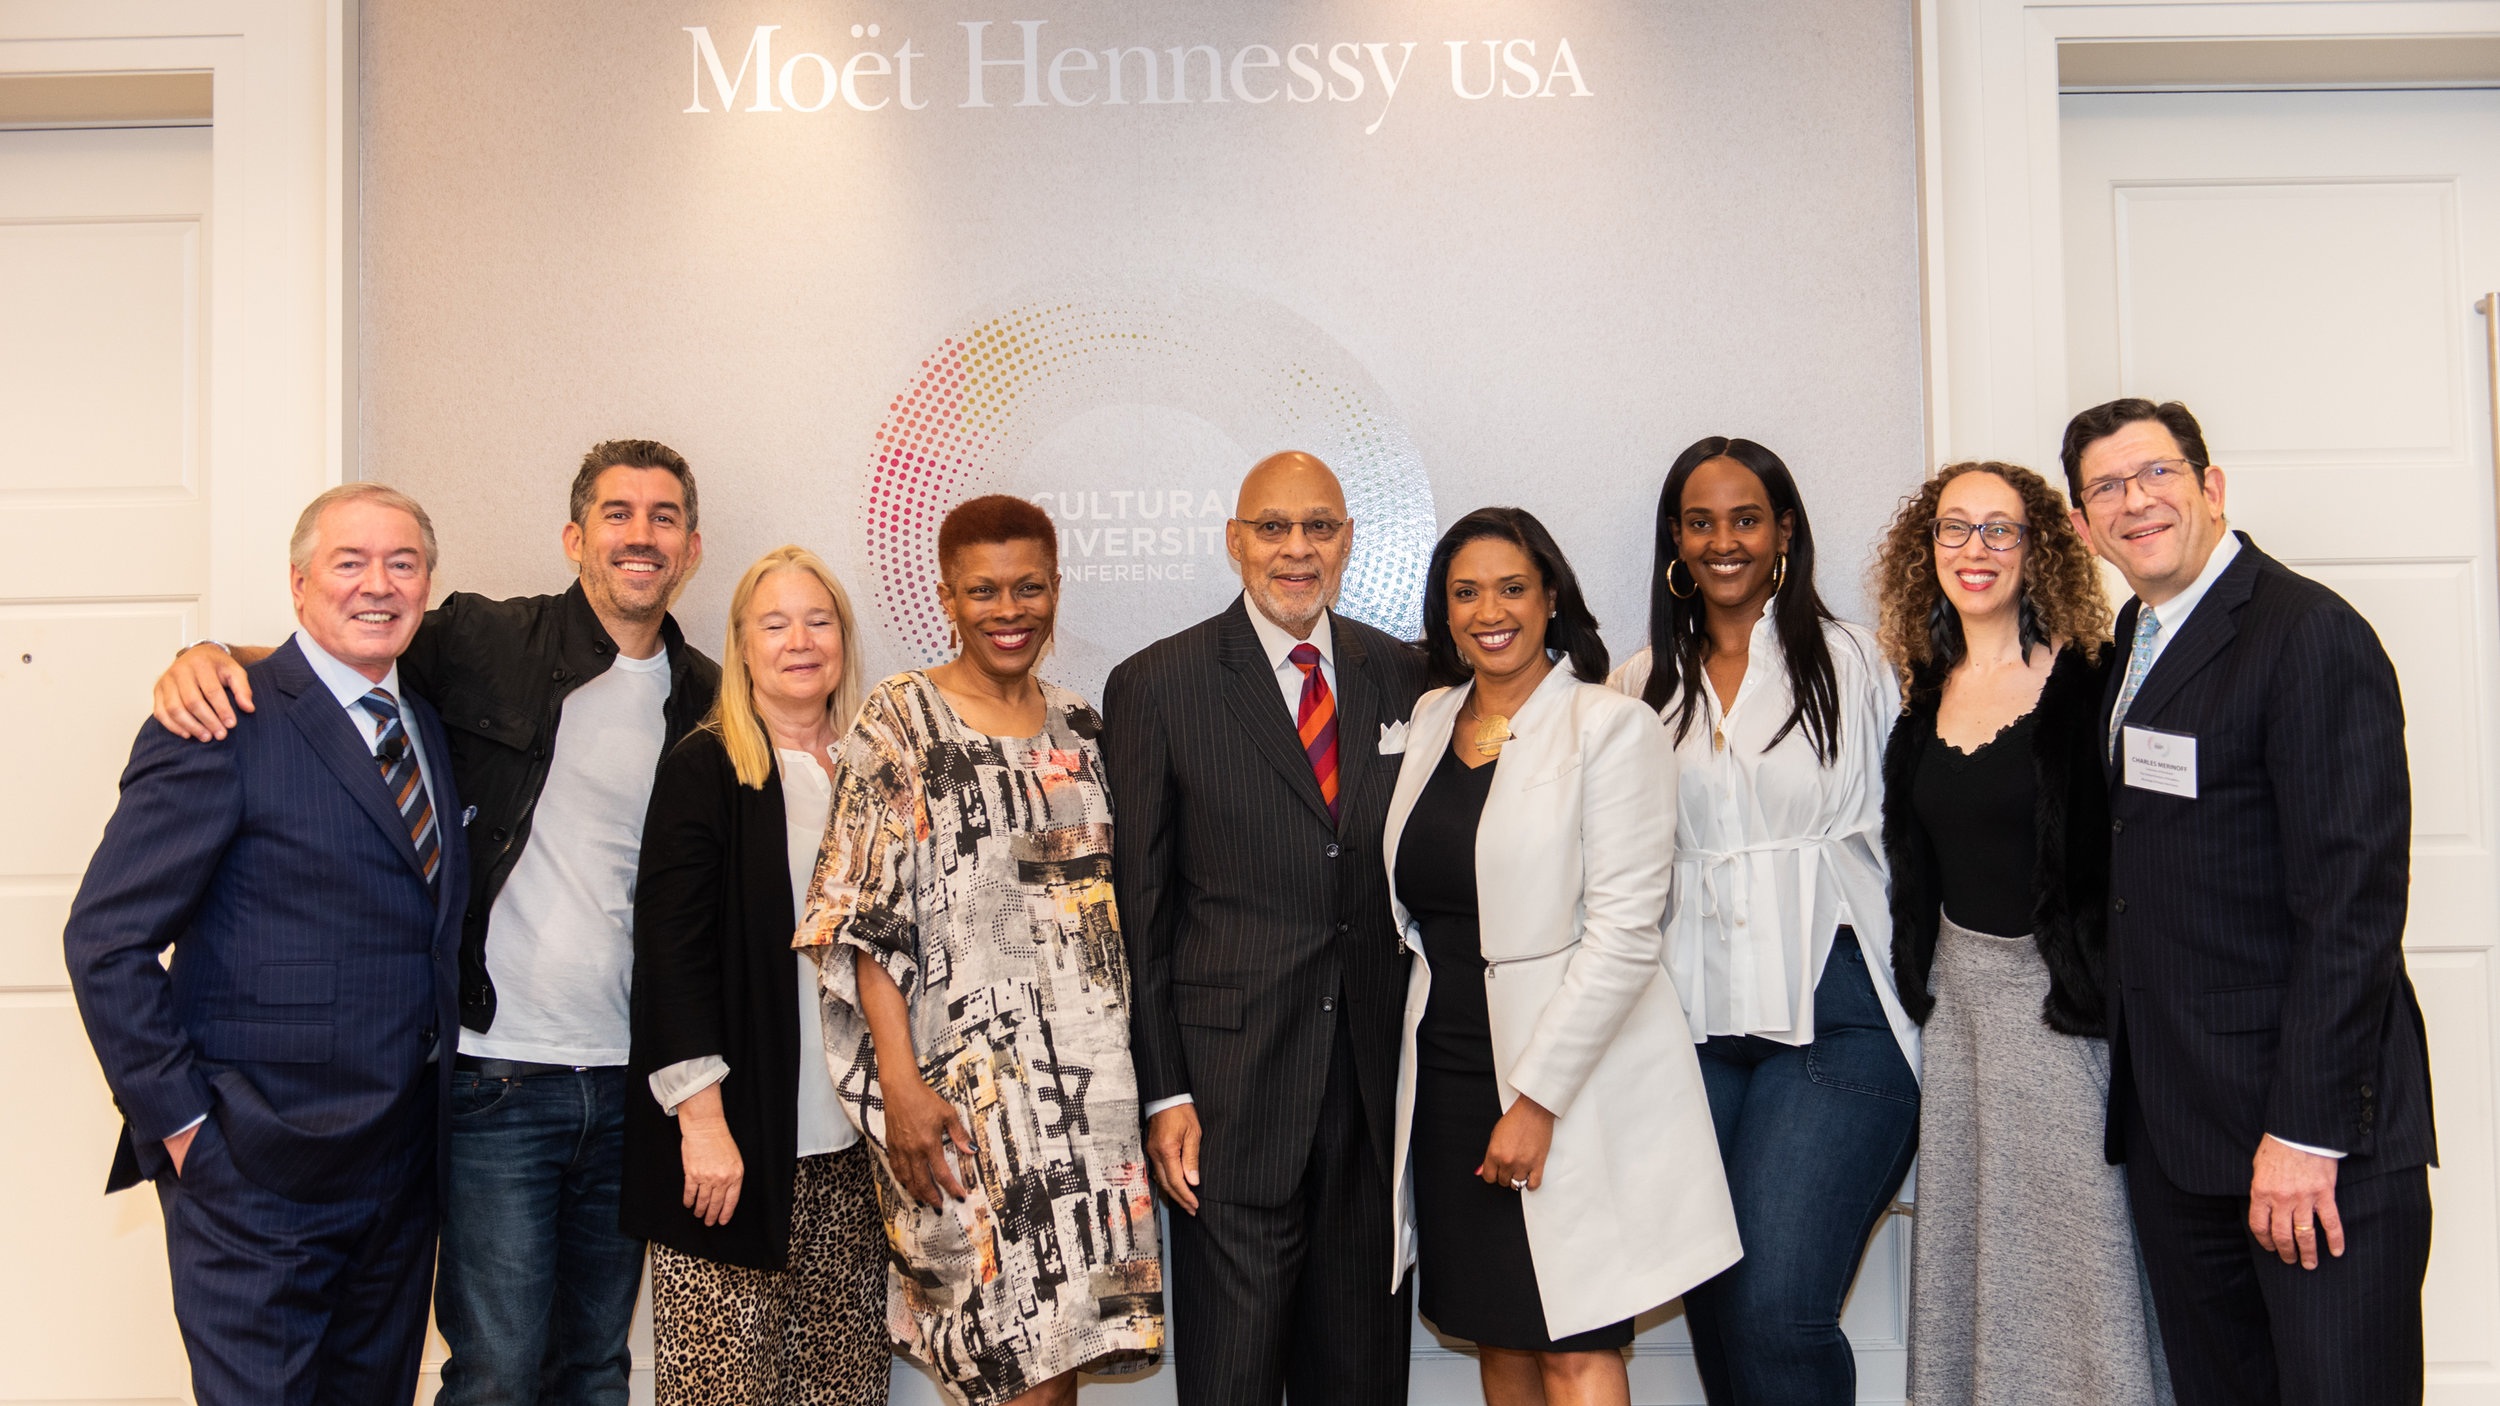 Moet Hennessy USA Cultural Diversity Conference — Touch Worldwide